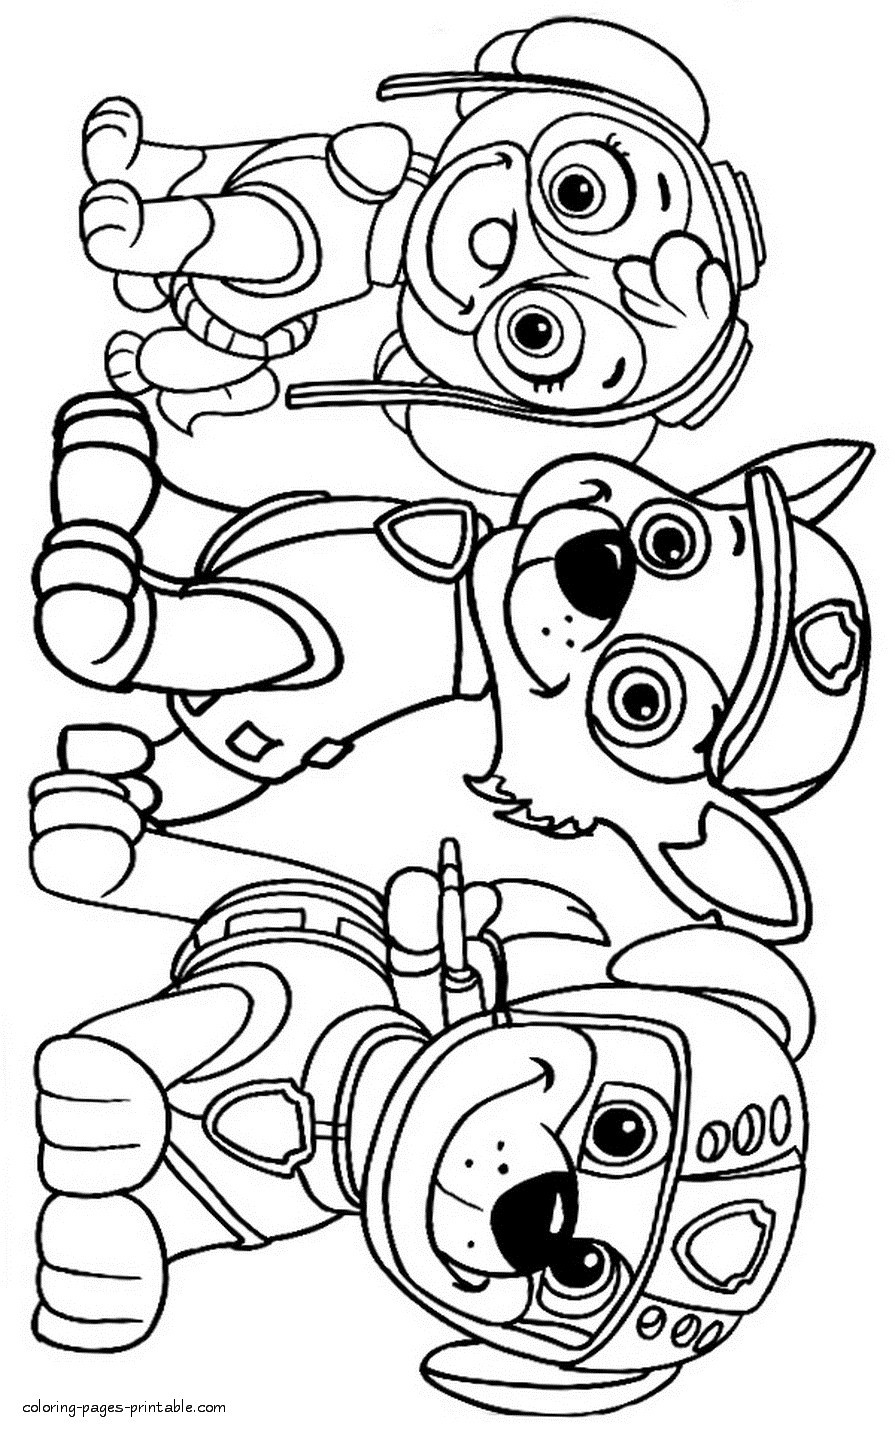 Coloring Pages For Kids Paw Patrol
 Paw Patrol Badges Coloring Pages at GetColorings